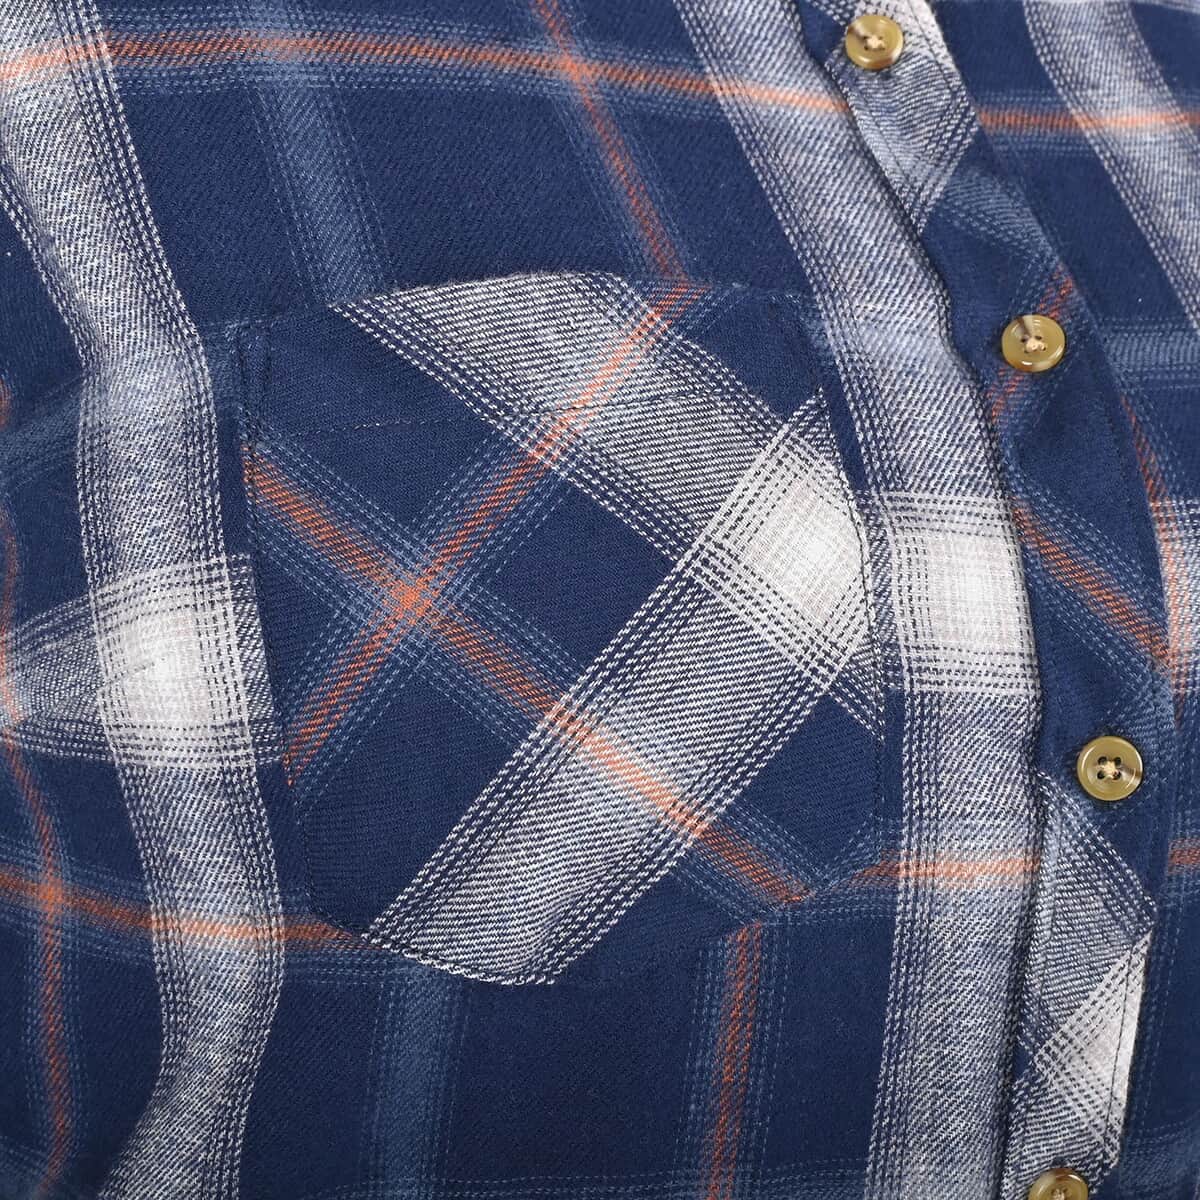 Victory Sportswear Blue and White Plaid Pattern Cotton Flannel Shirt - XL image number 5